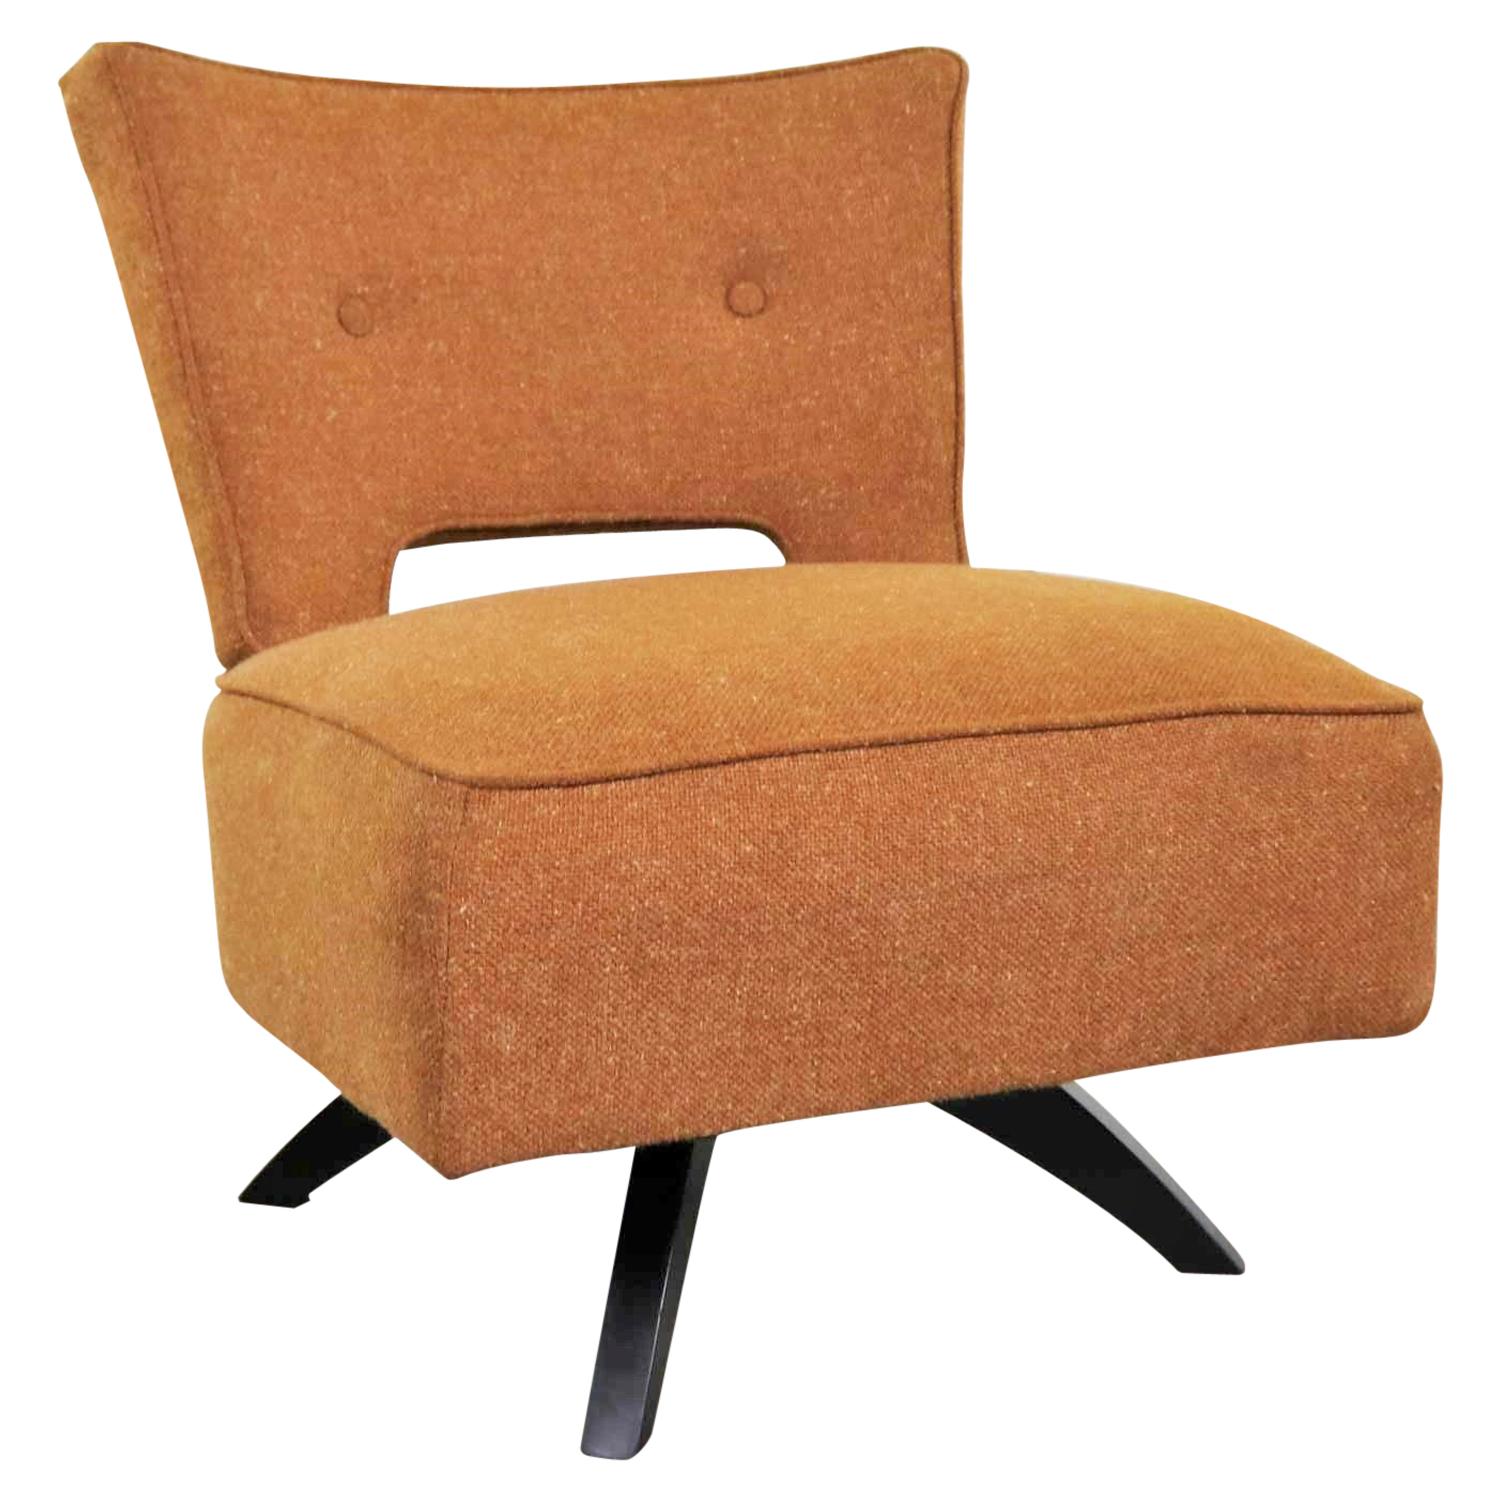 Mid-Century Modern Swivel Slipper Chair Attributed to Kroehler Manufacturing